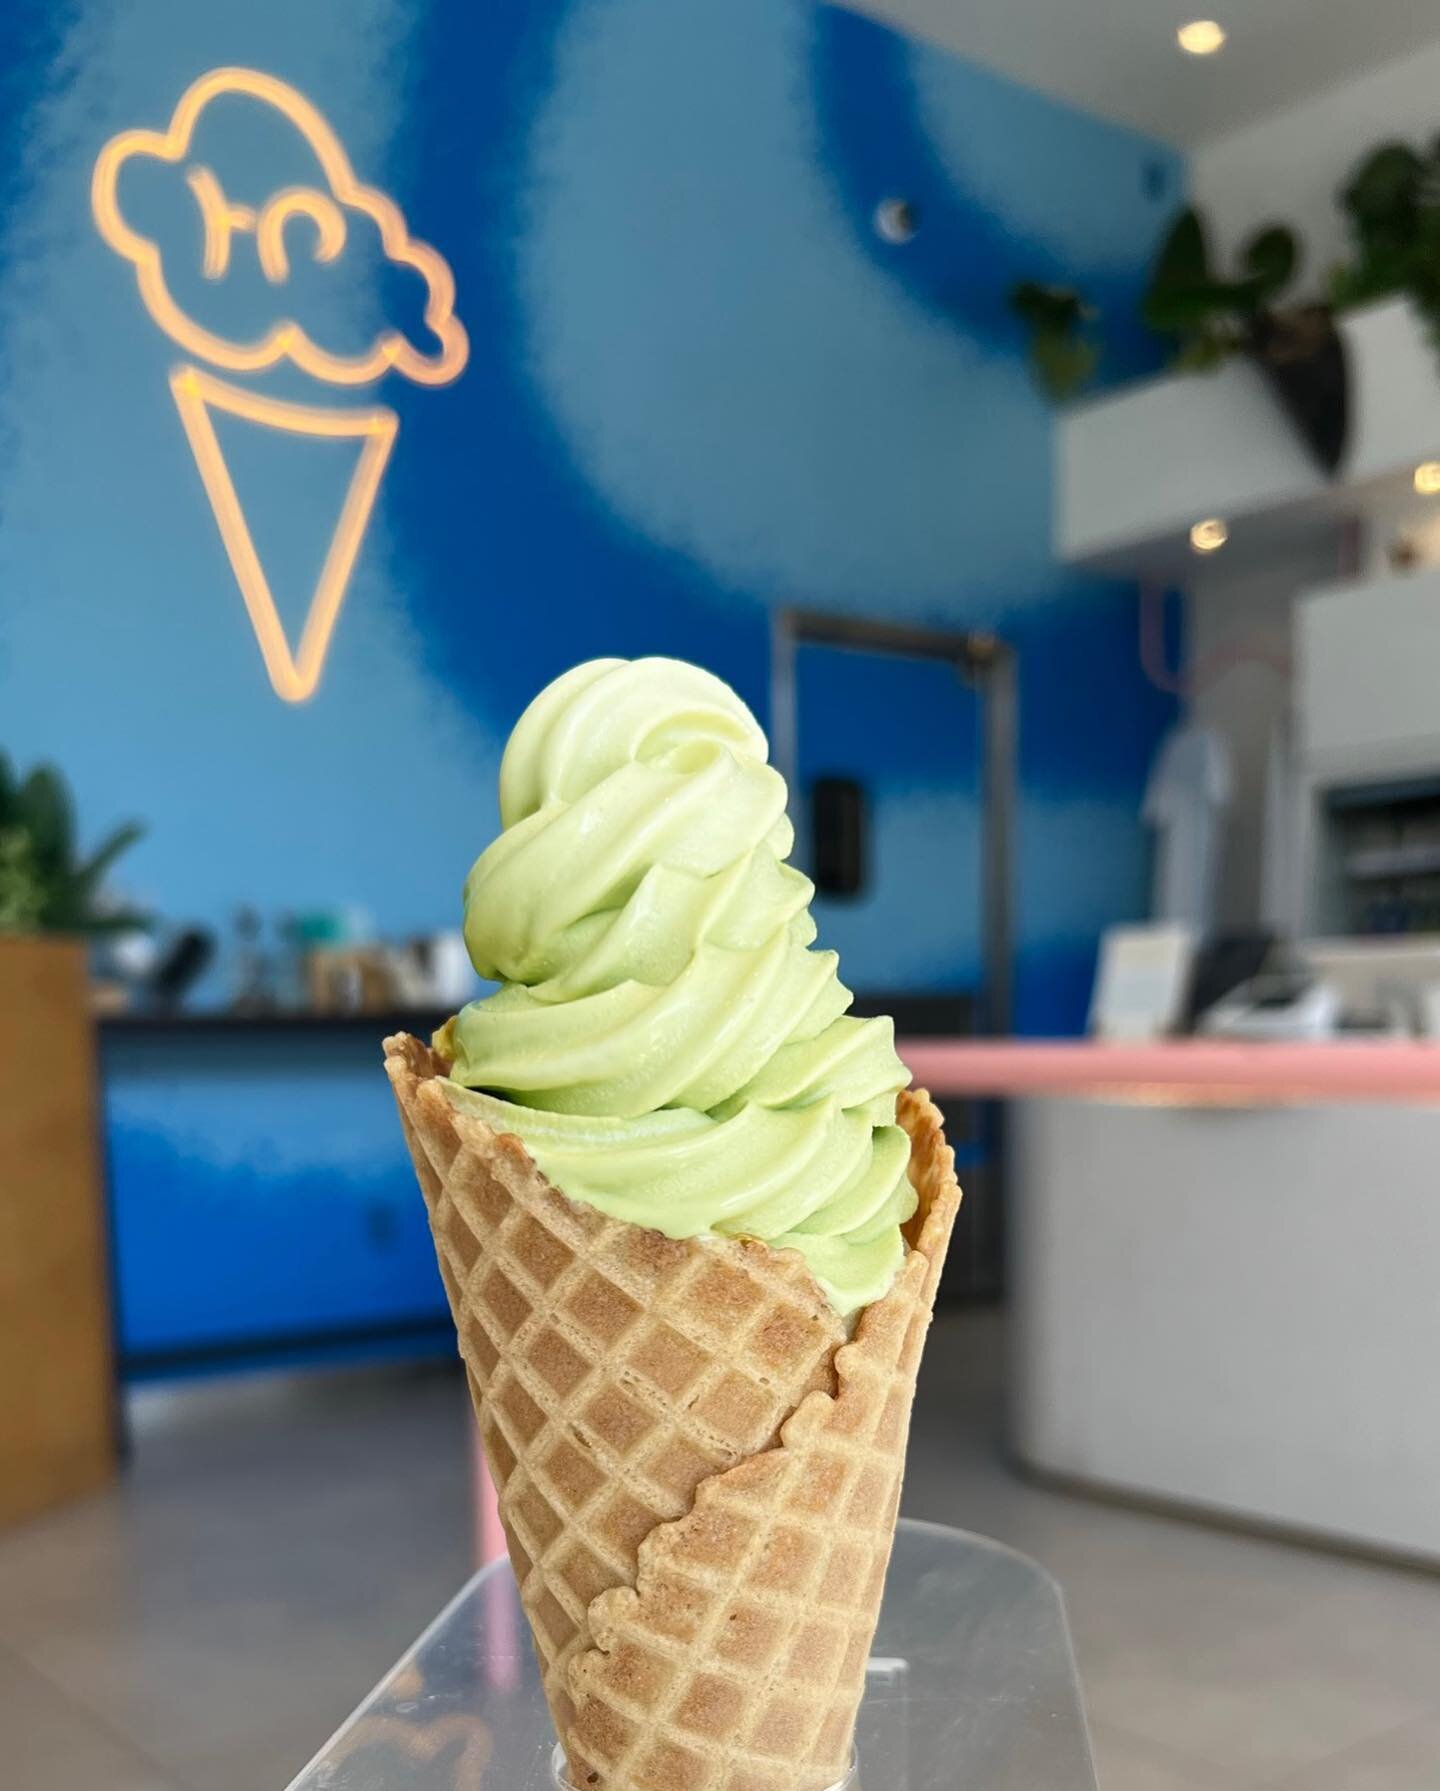 Introducing our first weekday special - Pistachio! The smoothest pistachio soft serve you will find, blended on the spot, and like all of our ice creams, available in dairy or non dairy. And you can get it as a soft serve ice cream, in a cloud bowl w